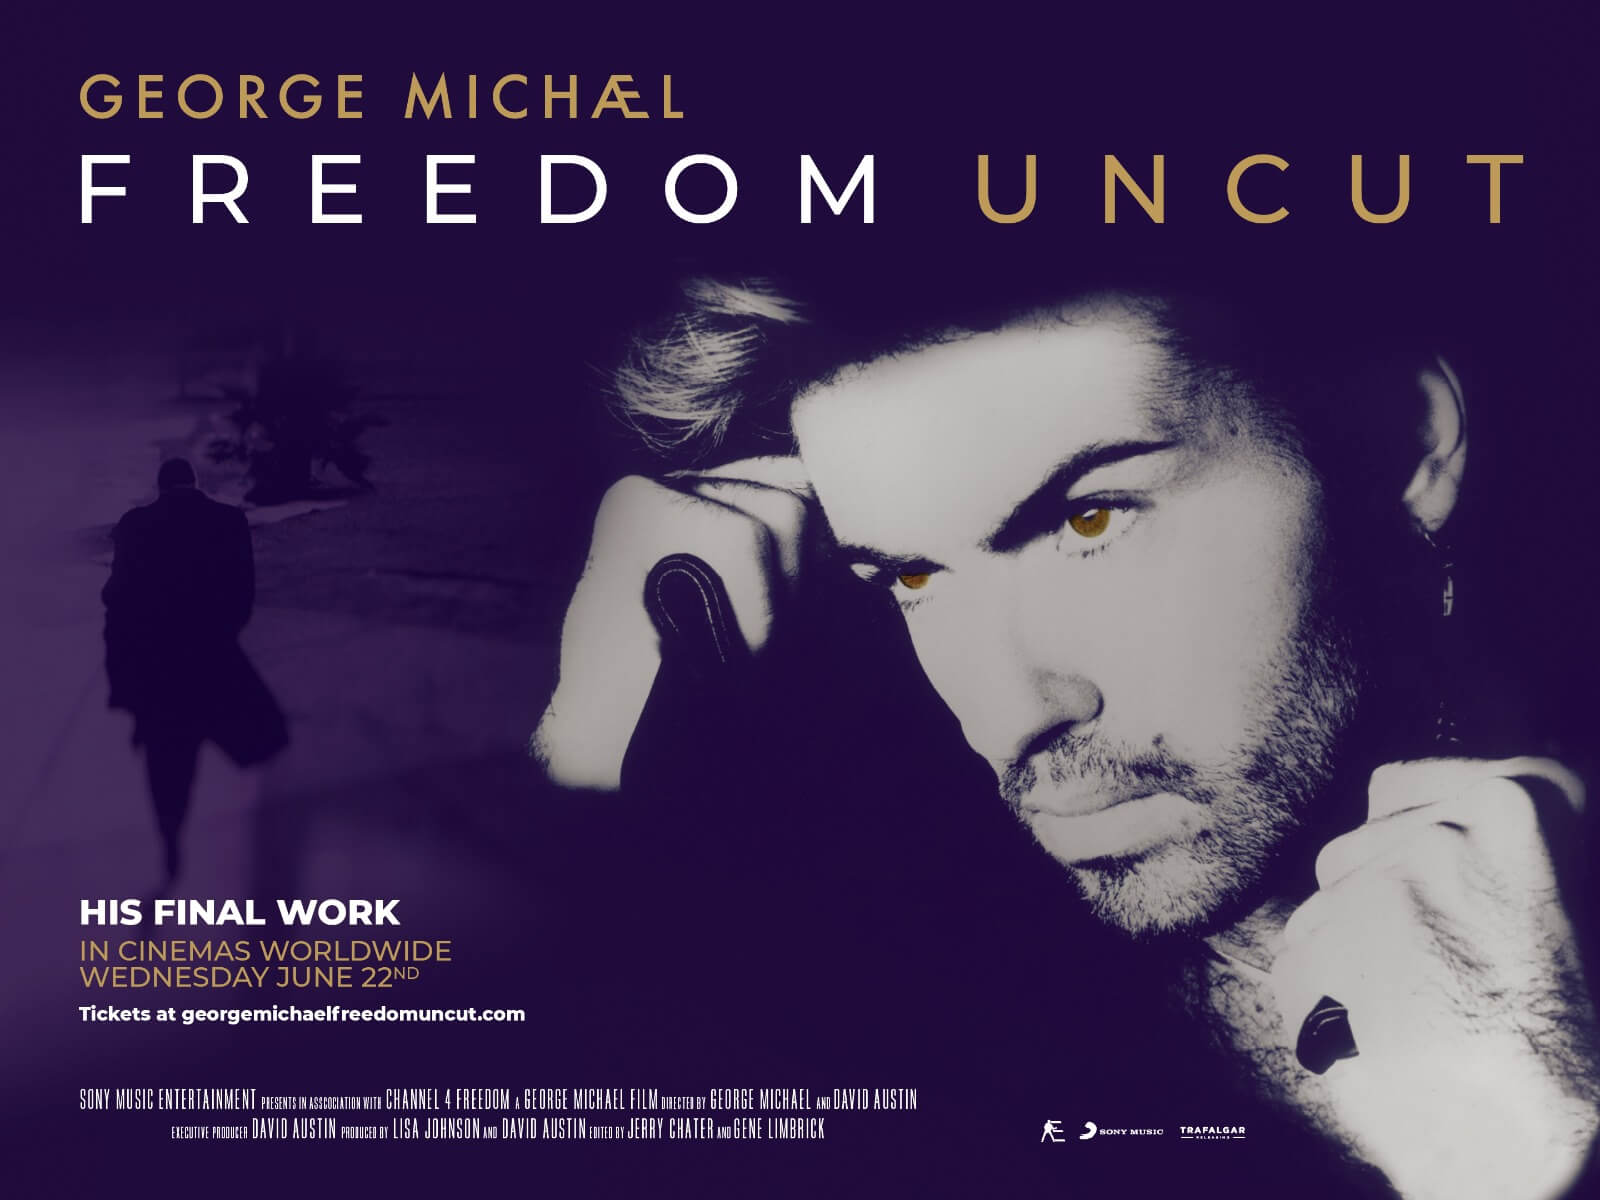 George Michael Freedom Uncut Exclusively at Golden Village